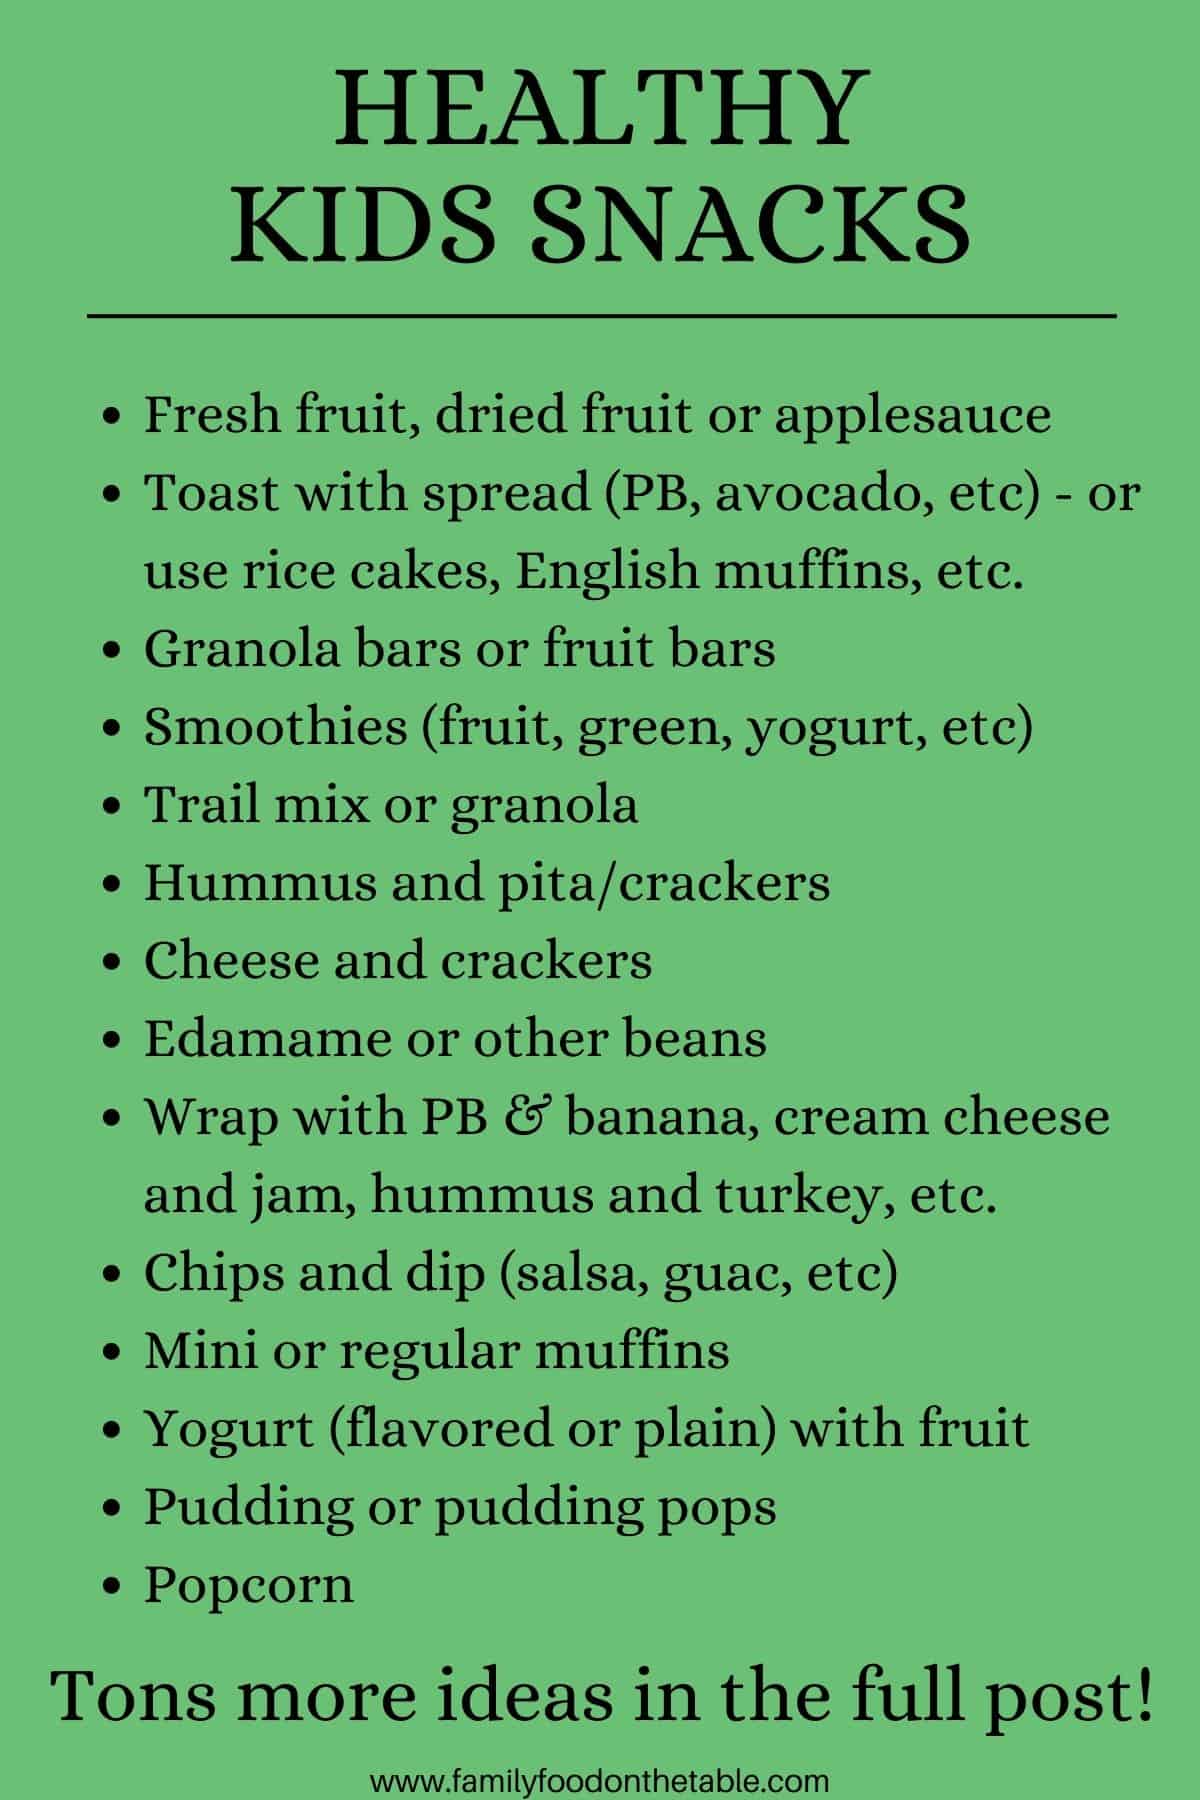 A bulleted list of tons of ideas for healthy kids snacks on a green background.